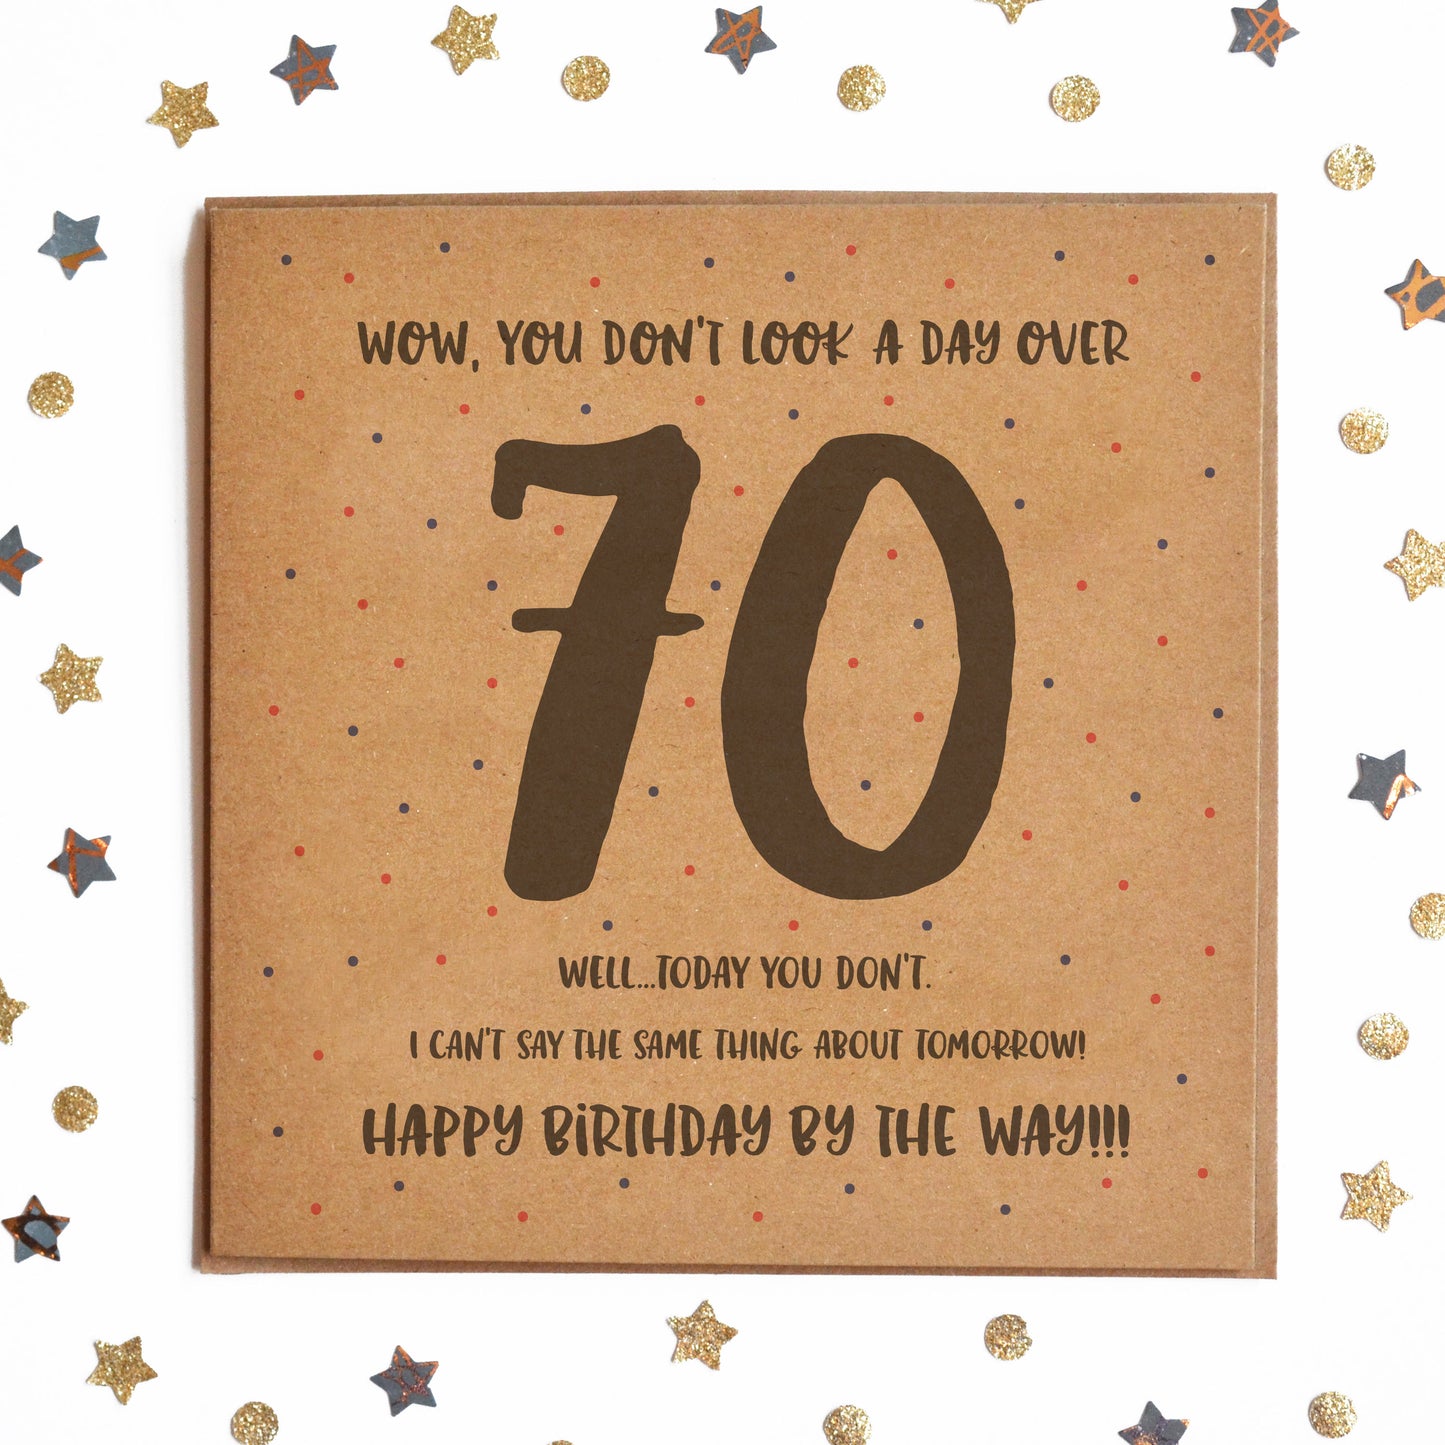 Funny Milestone Birthday Card with the message "WOW, YOU DON'T LOOK A DAY OVER 70! WELL TODAY YOU DON'T! I CAN'T SAY THE SAME THING ABOUT TOMORROW! HAPPY BIRTHDAY BY THE WAY!"